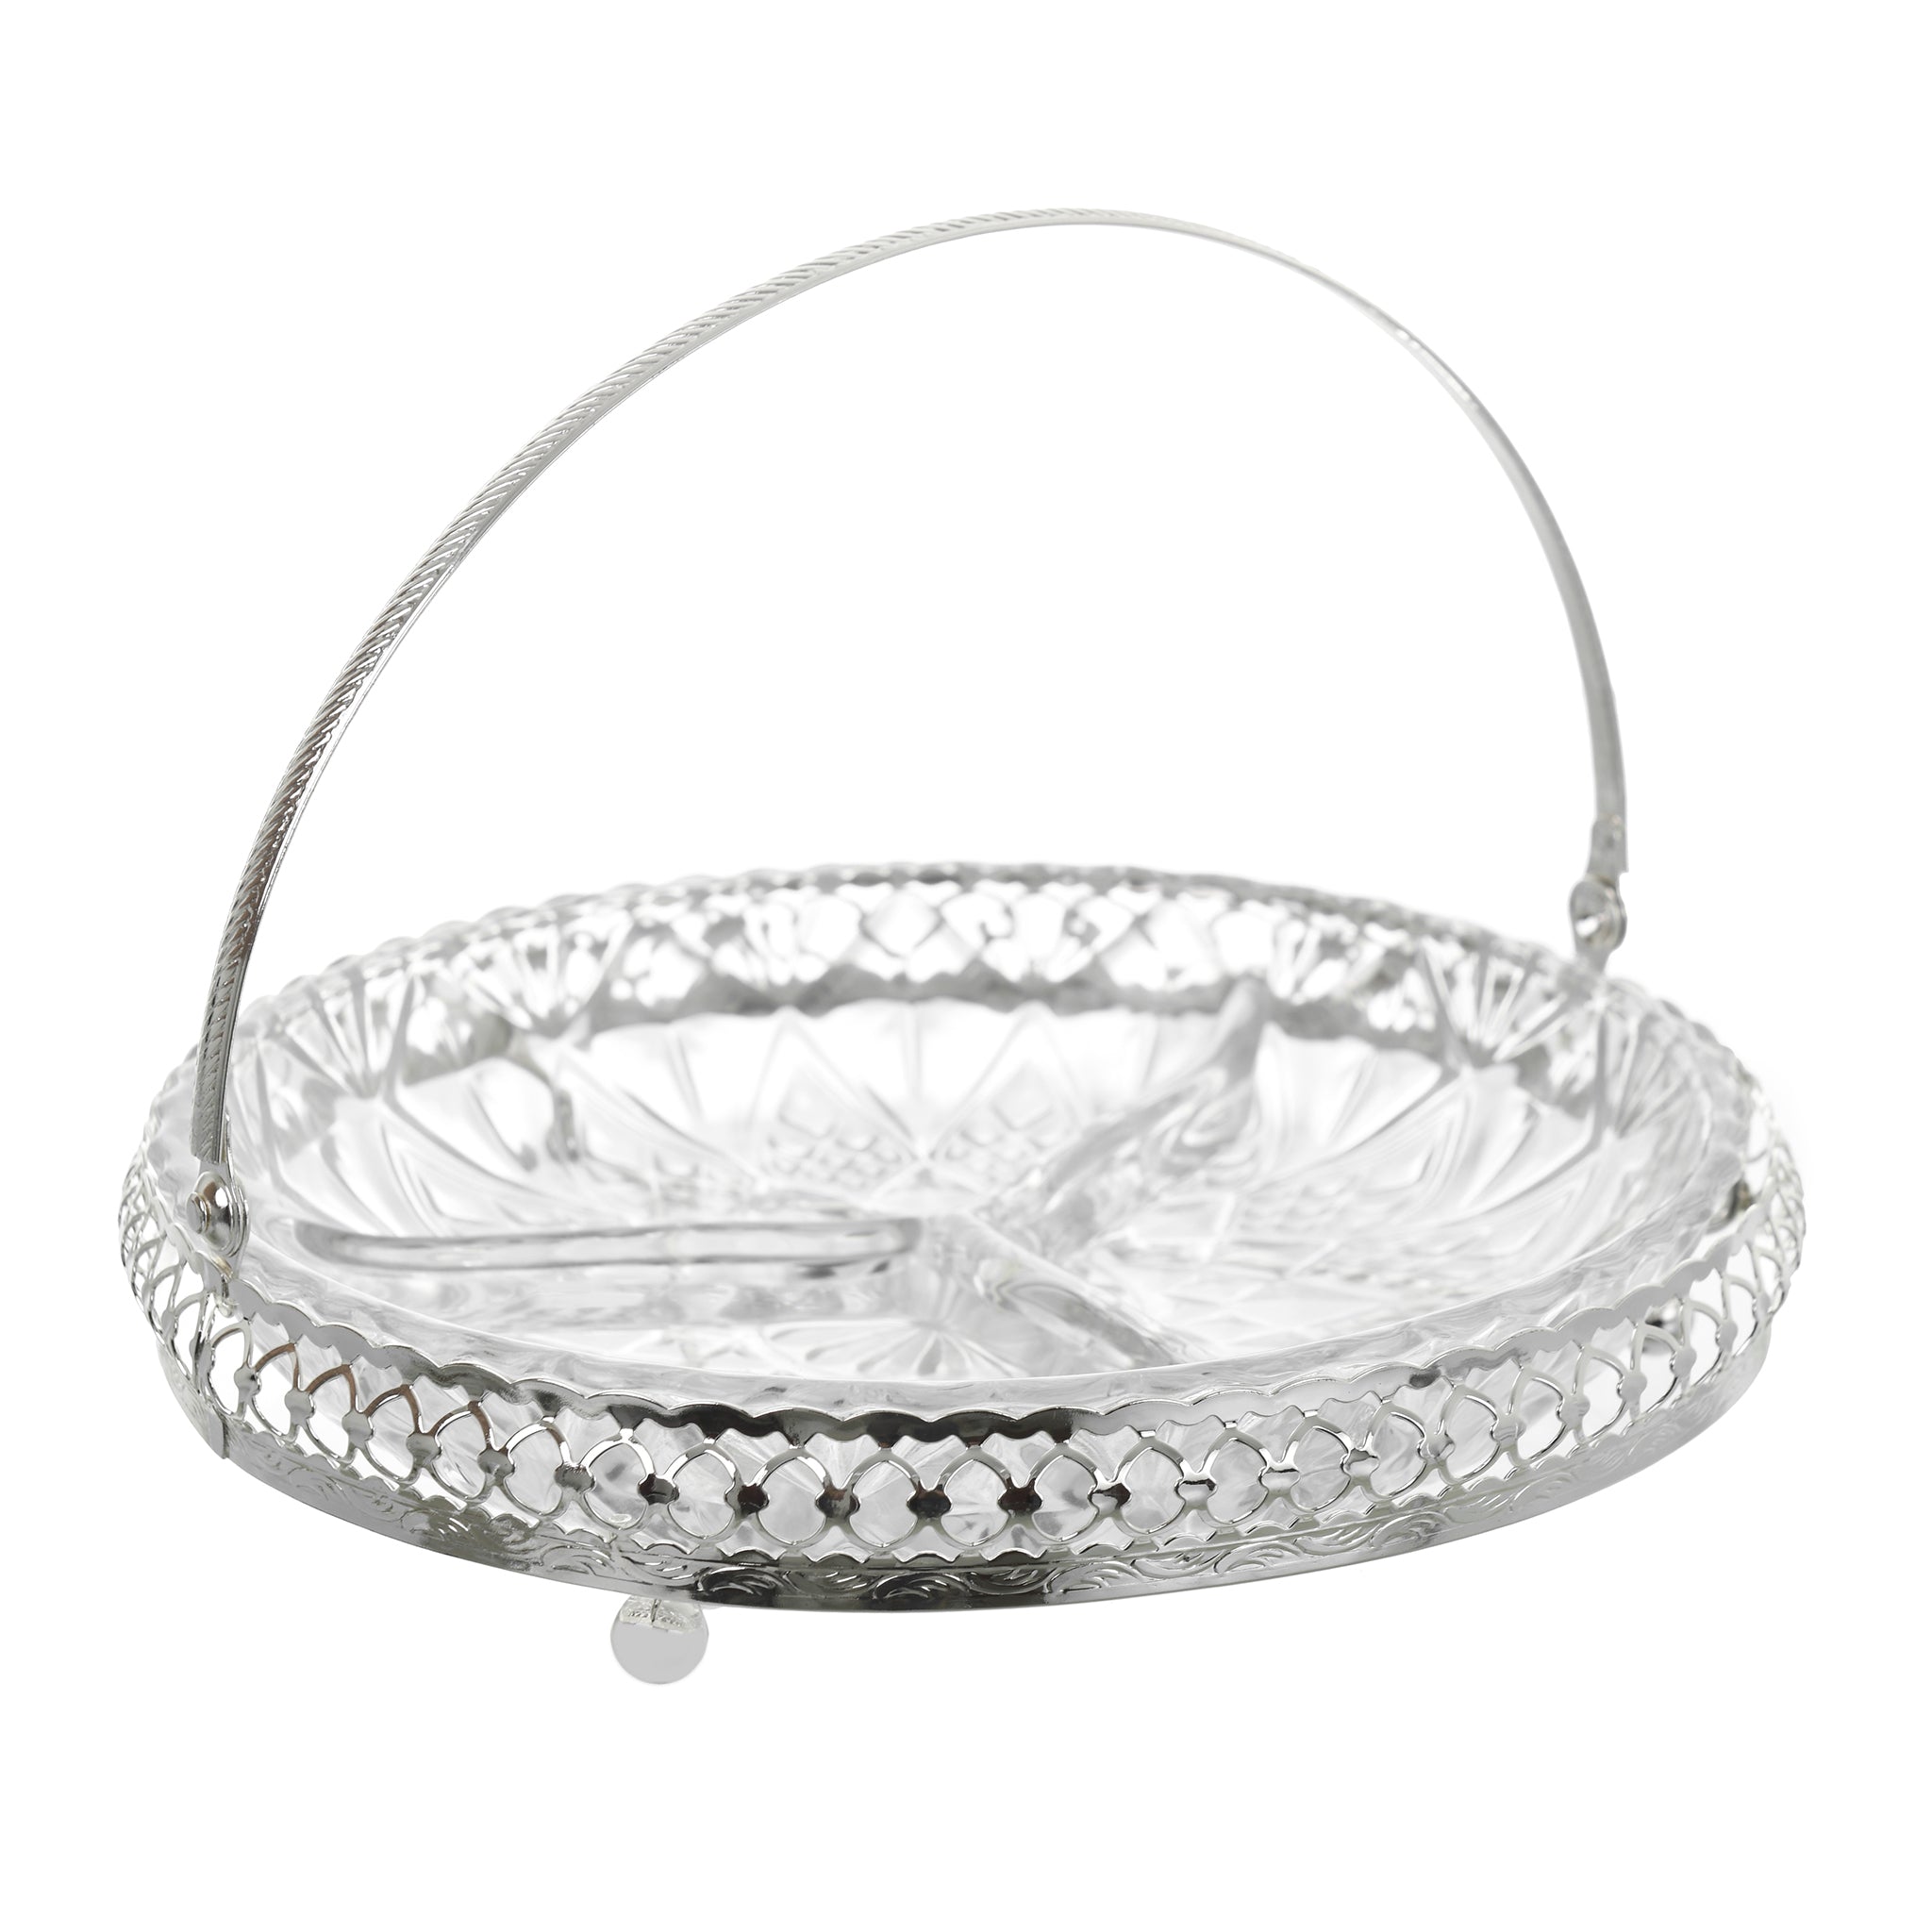 Queen Anne - Round Hors d'oeuvre with Handle - Silver Plated Metal - 23cm - 26000440